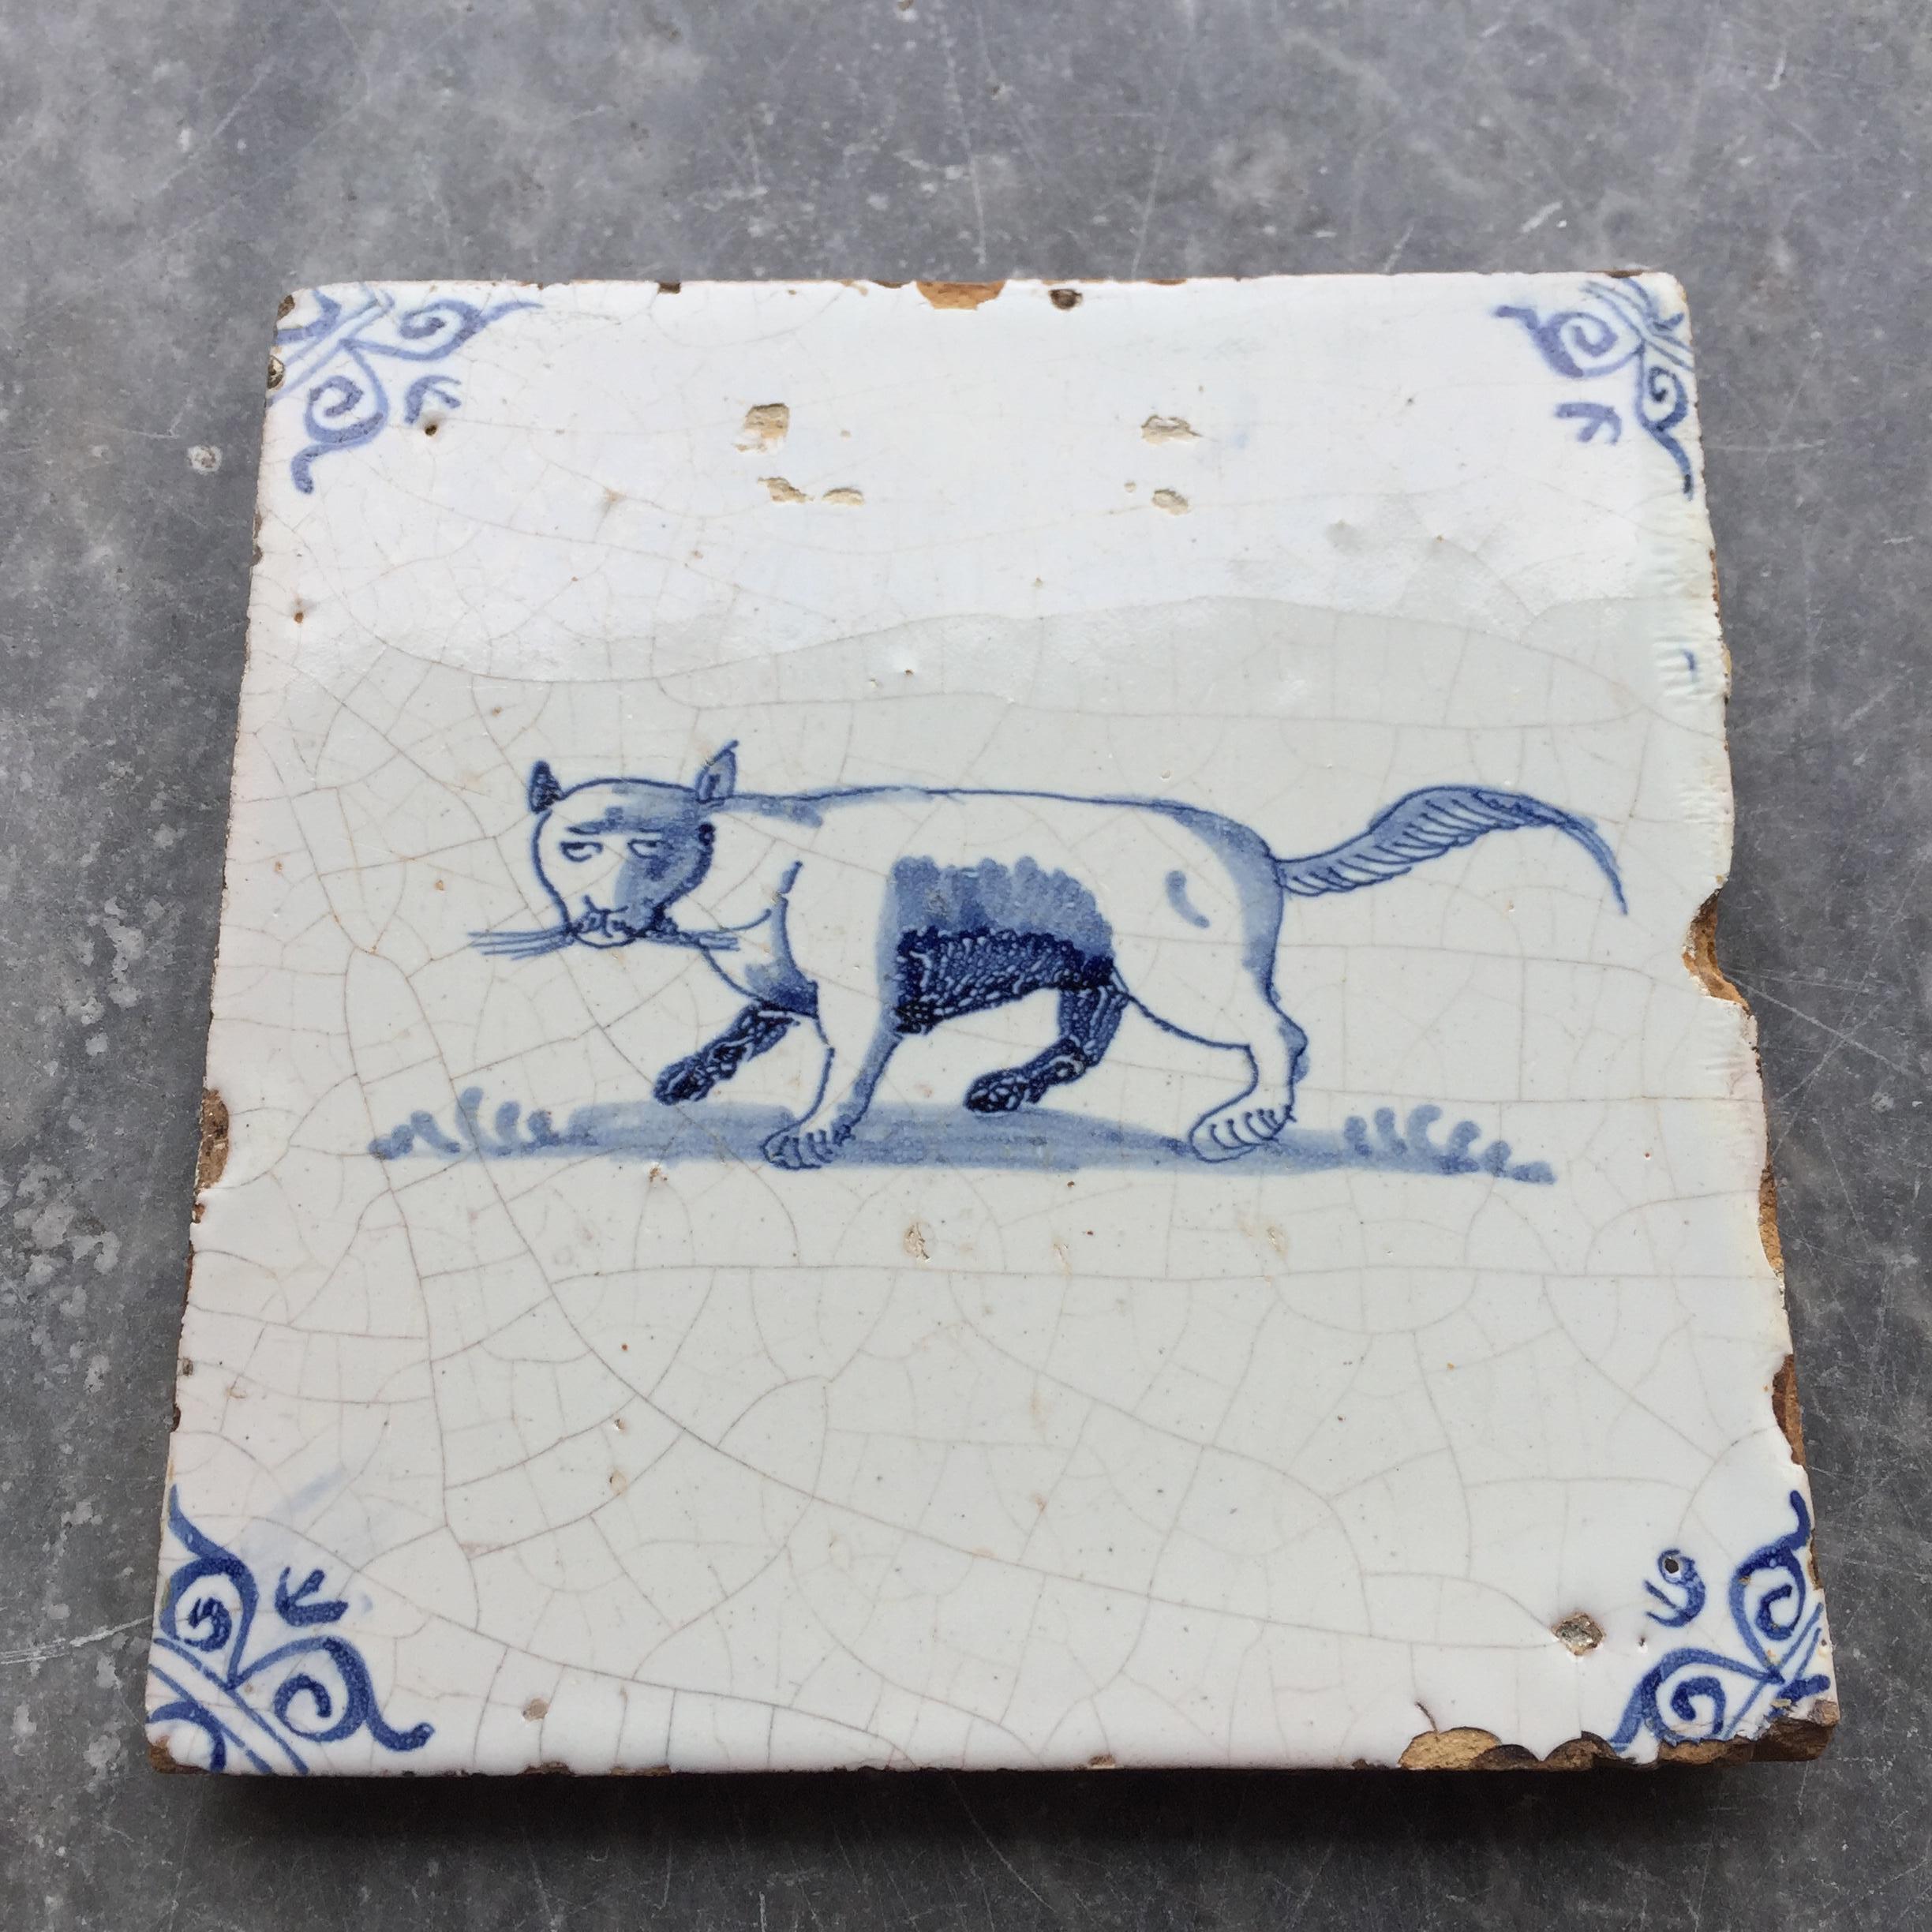 Hand-Painted Blue and White Dutch Delft Tile with Cat, Mid 17th Century